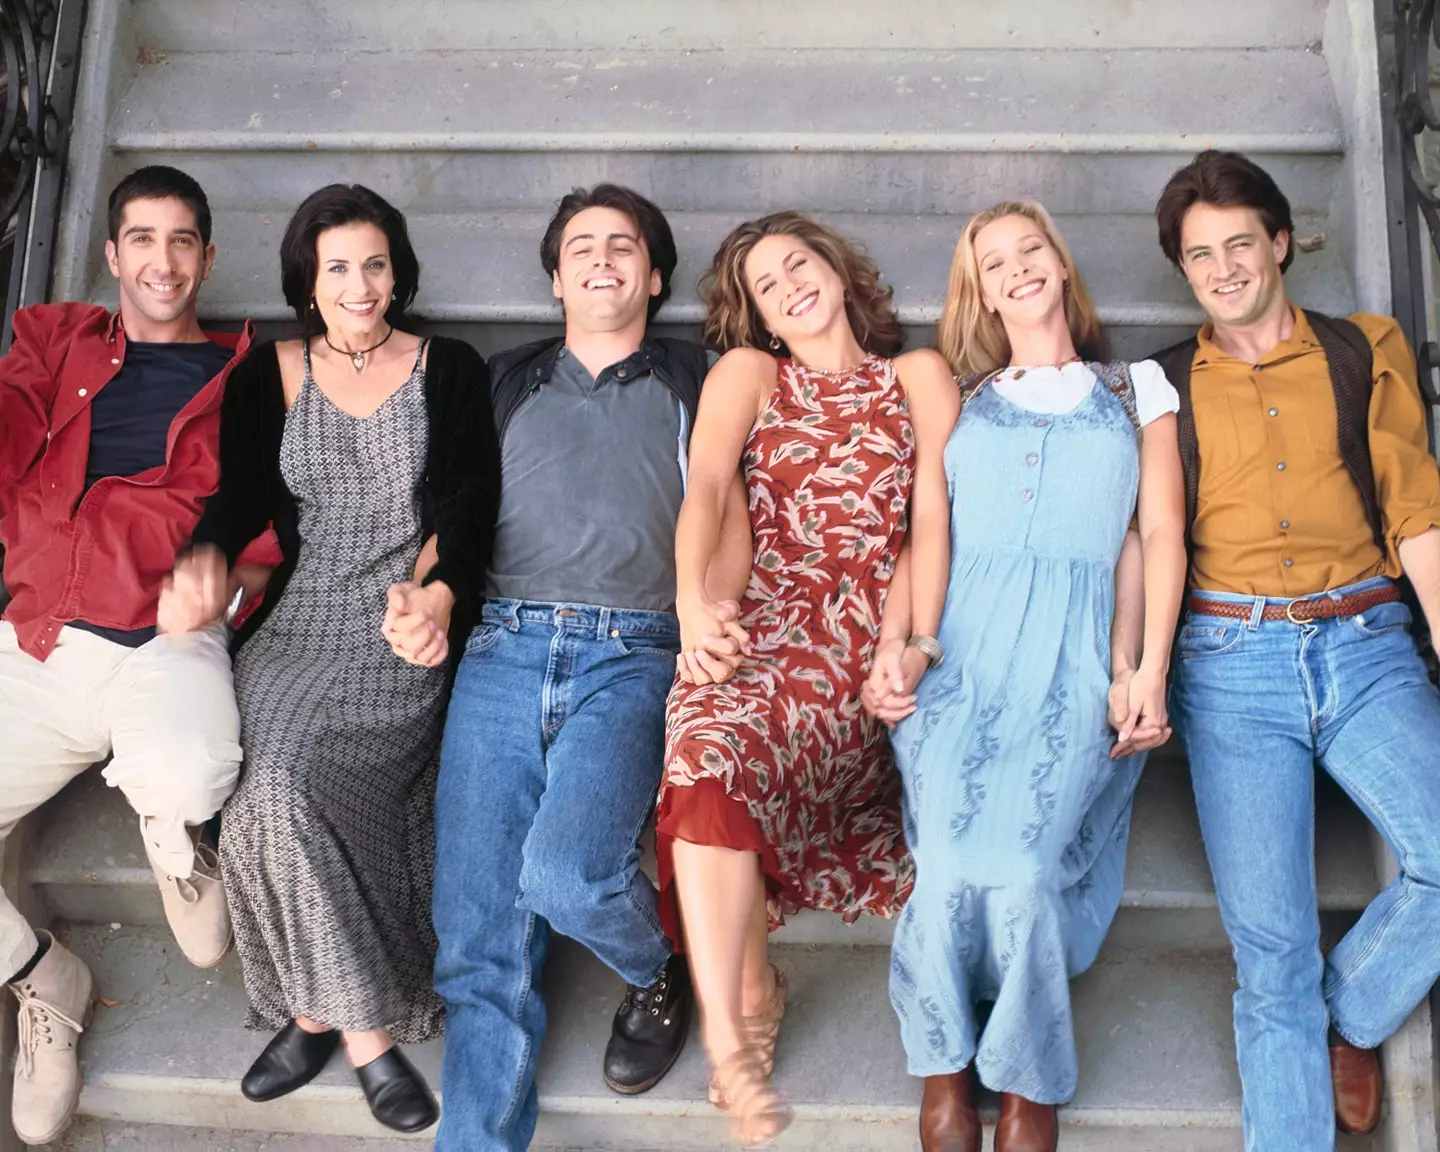 The Friends cast describe themselves as 'family'.